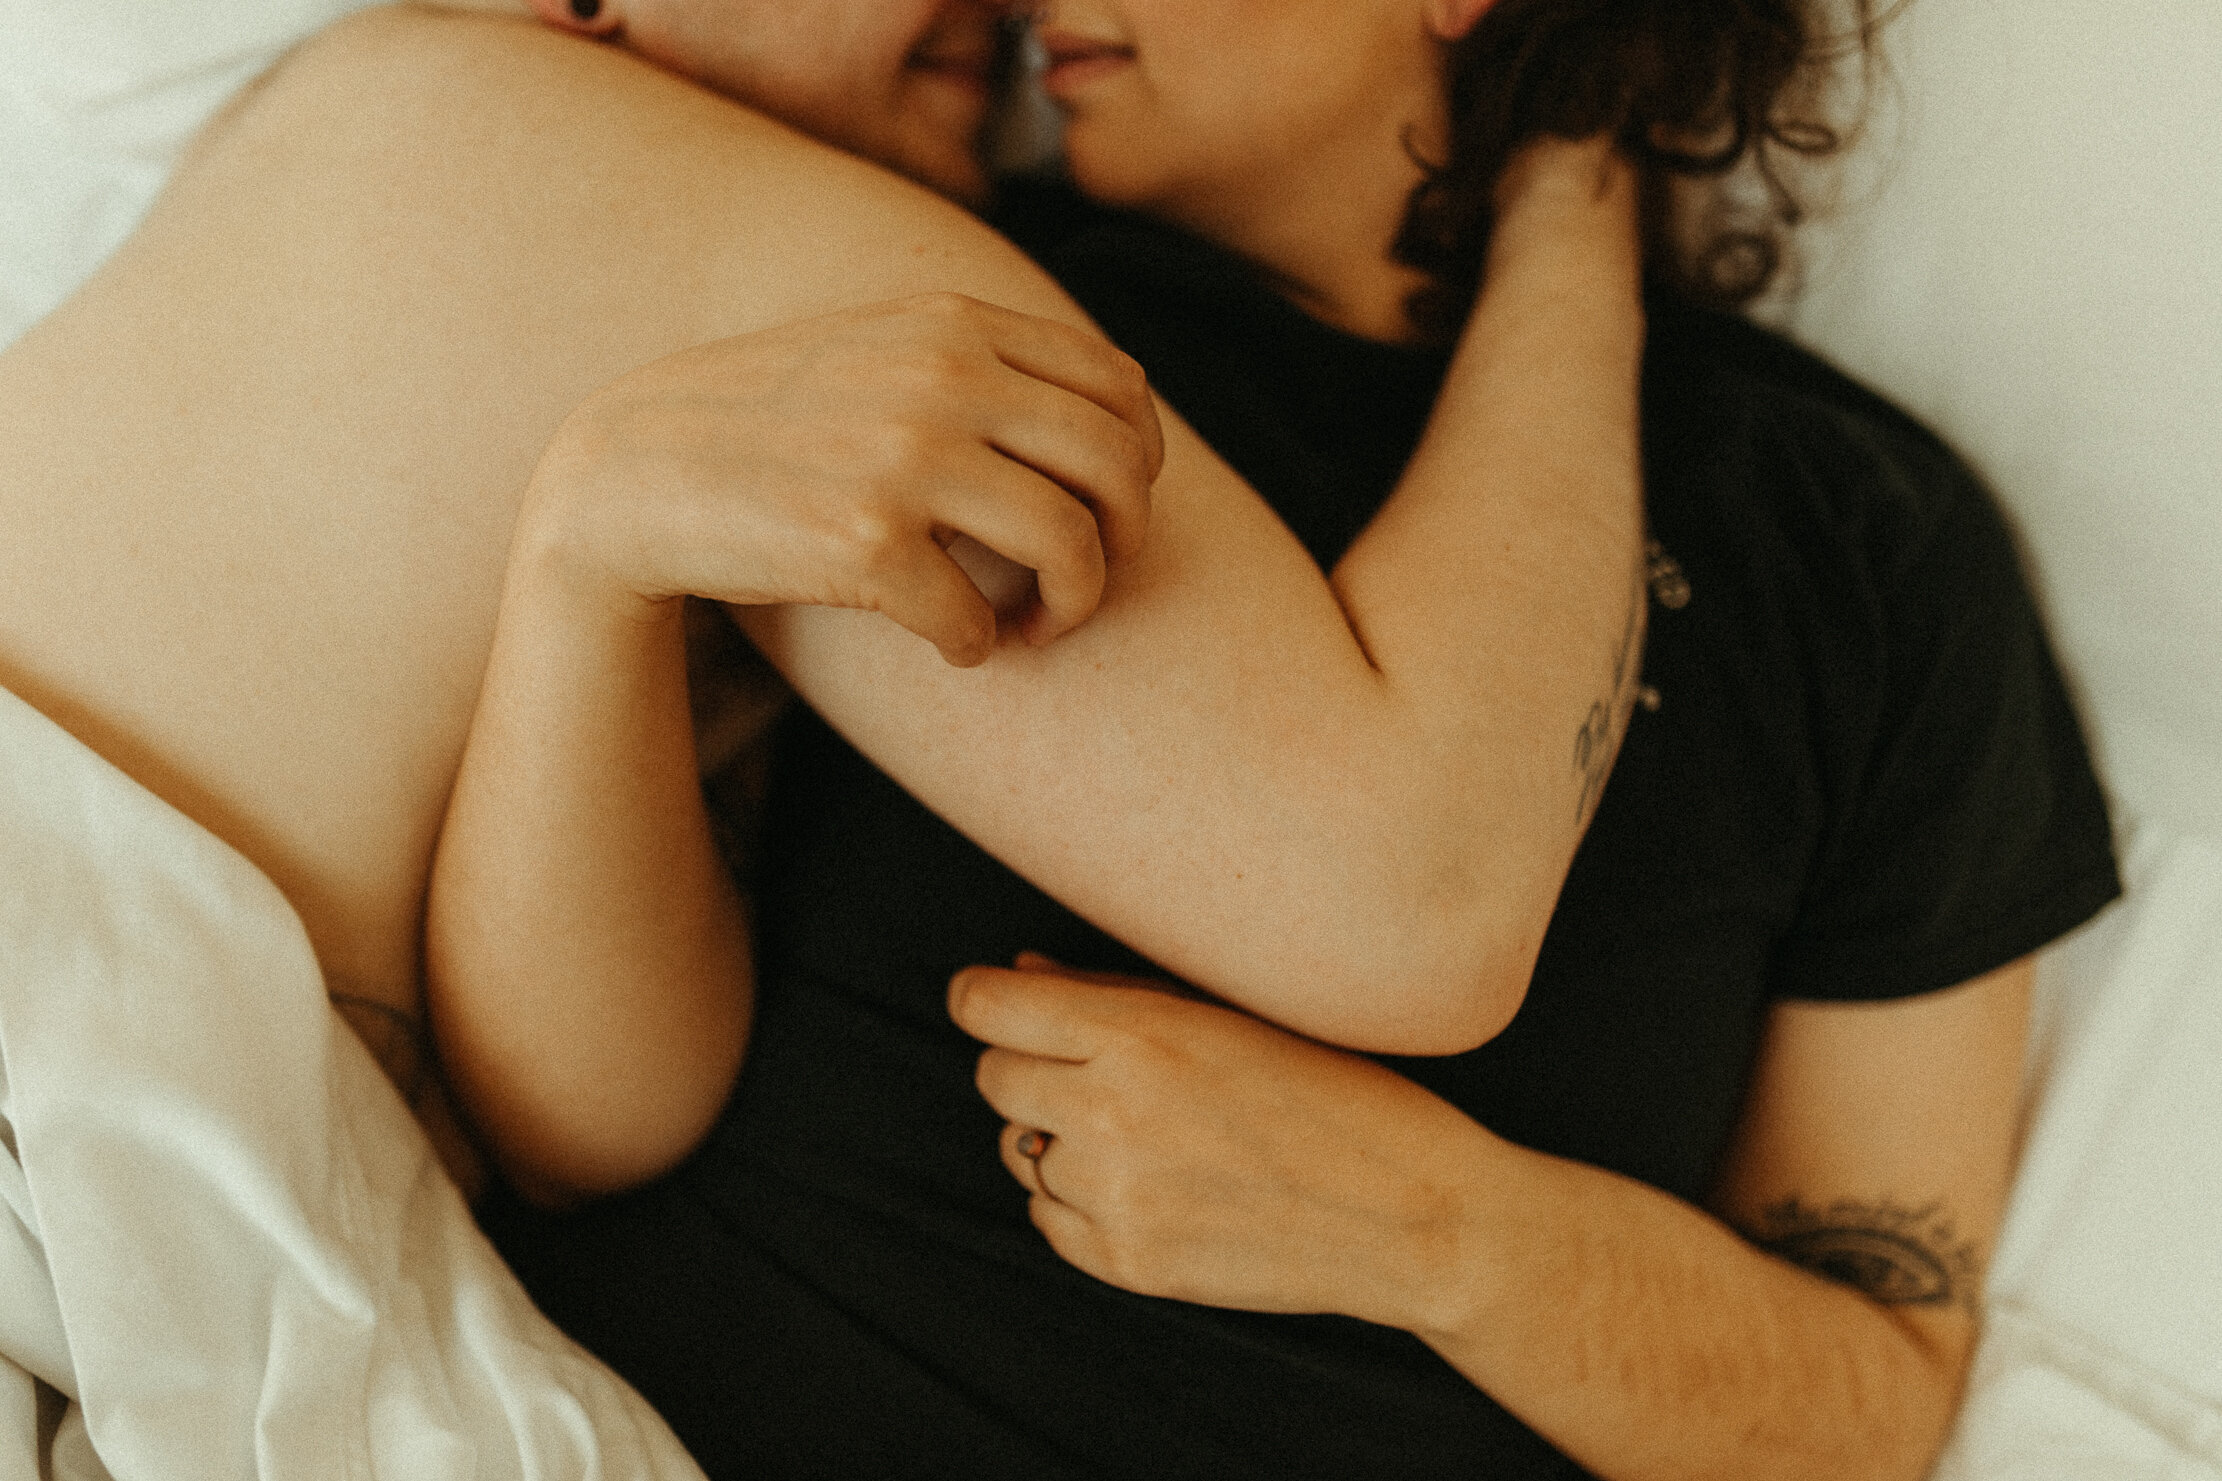 seattle-portland-tacoma-queer-trans-non-binary-intimate-in-home-pnw-engaygement-engagement-couples-boudoir-photographer-halle-roland-photography-258.jpg